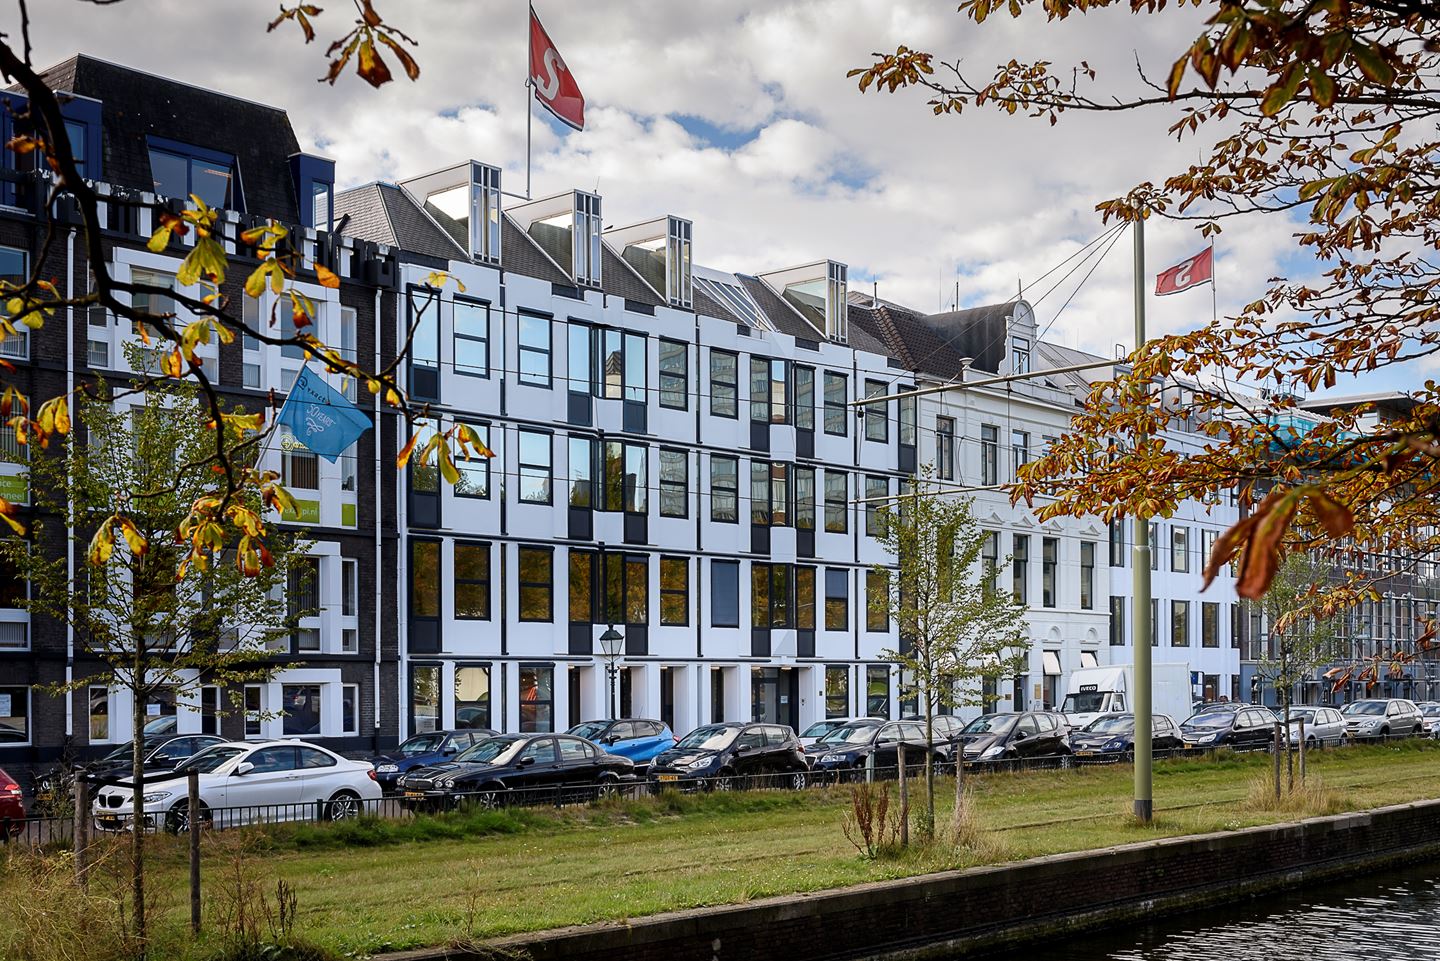 Rent Office Space At Koninginnegracht 10 In The Hague | Workthere